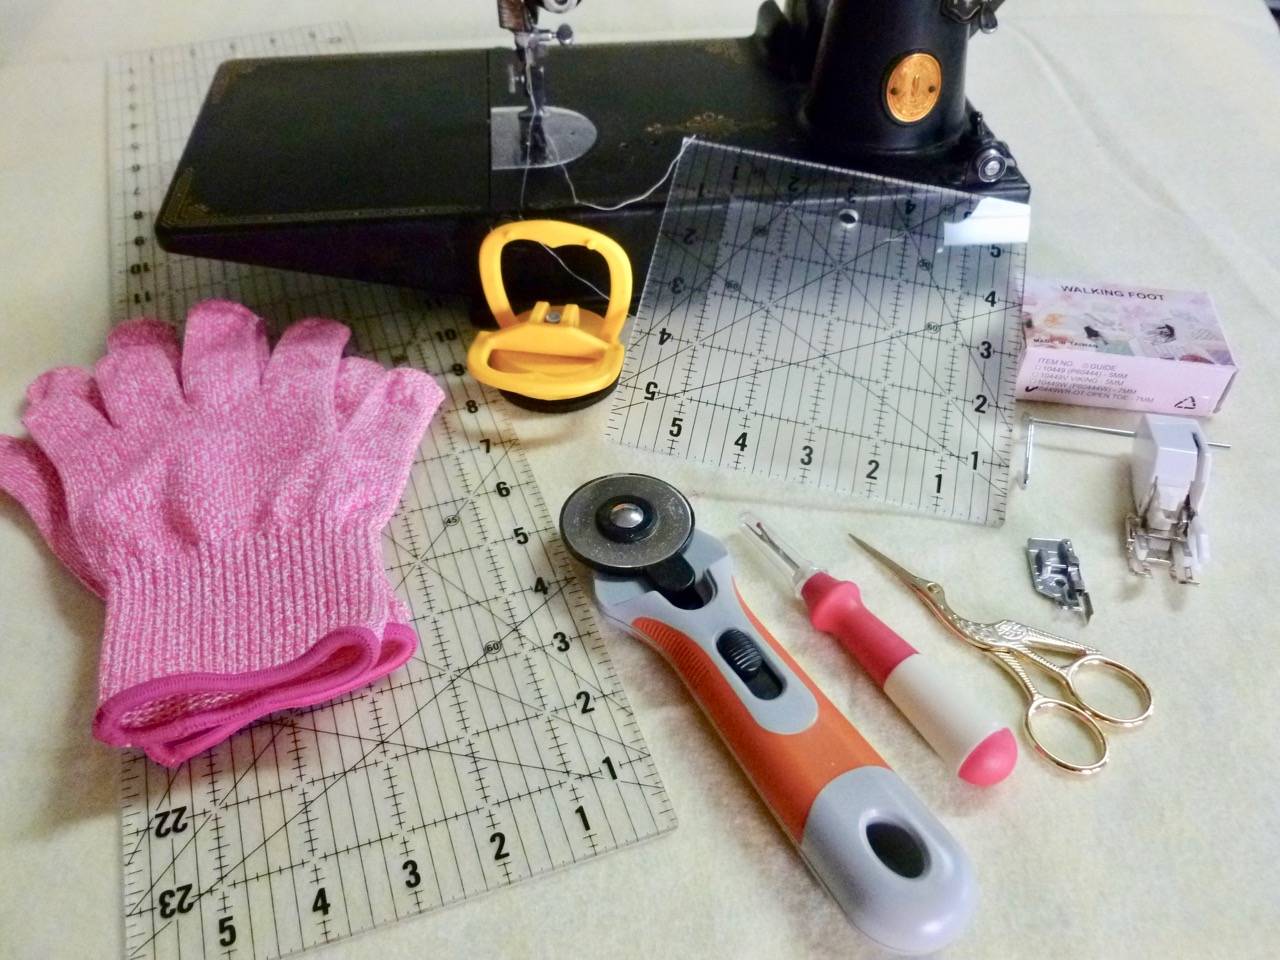 The essential quilting tools for a beginner